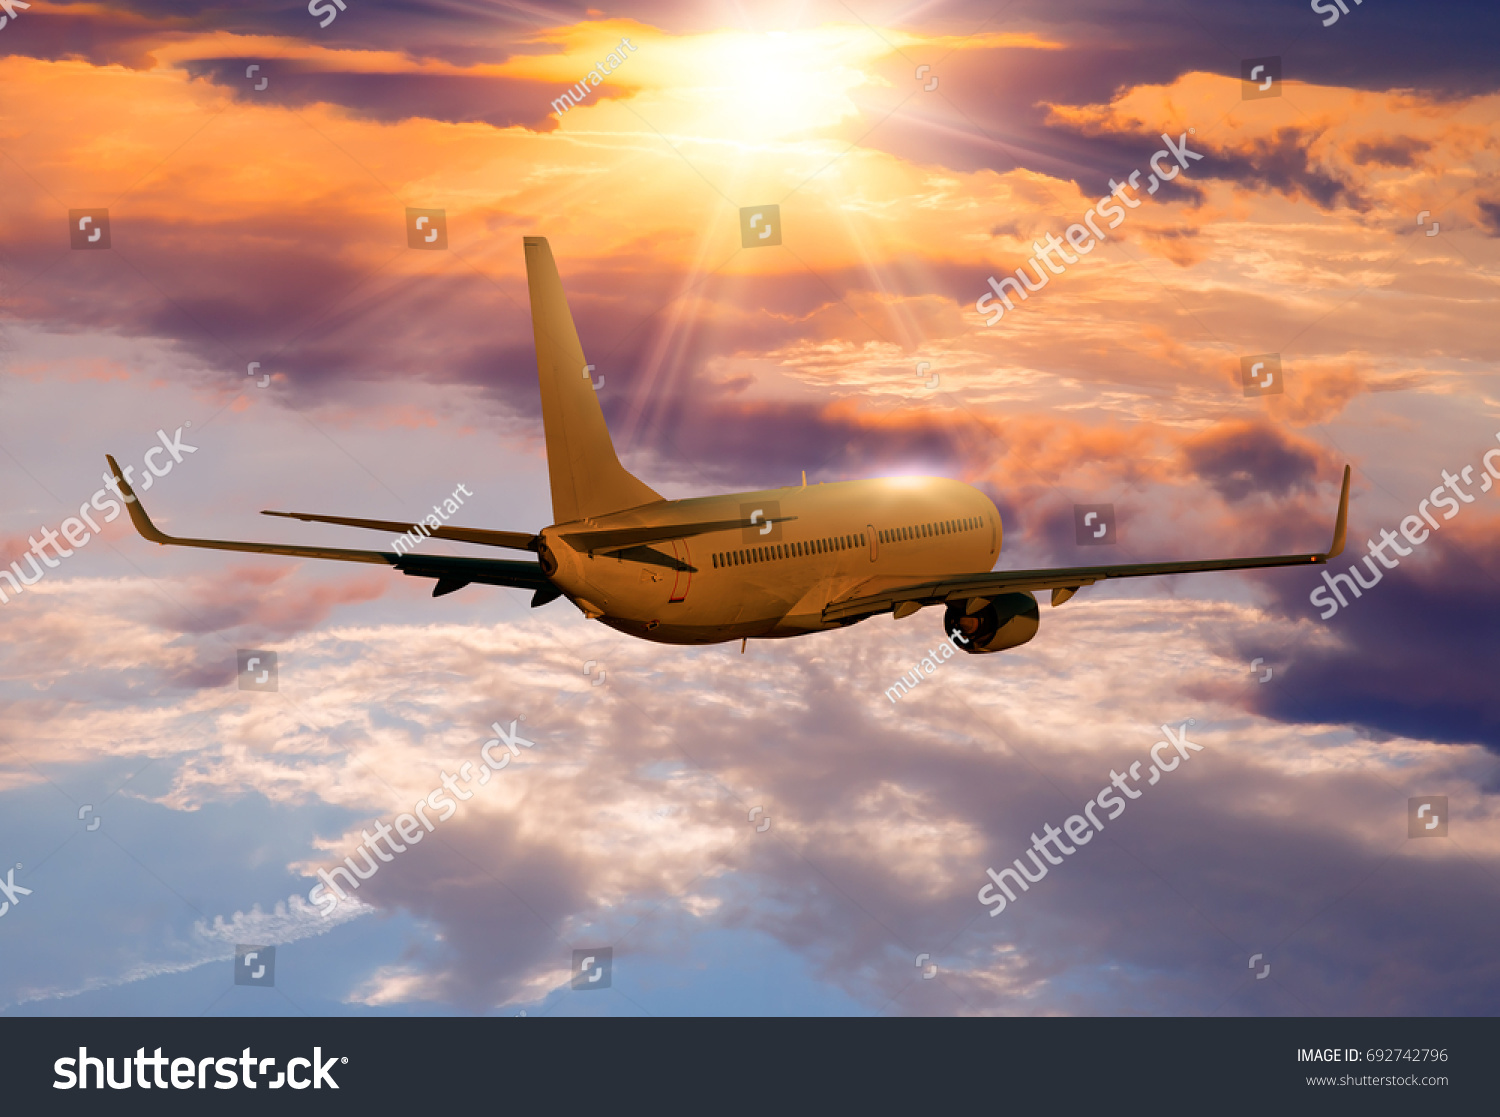 Commercial airplane flying above clouds in dramatic sunset  #692742796